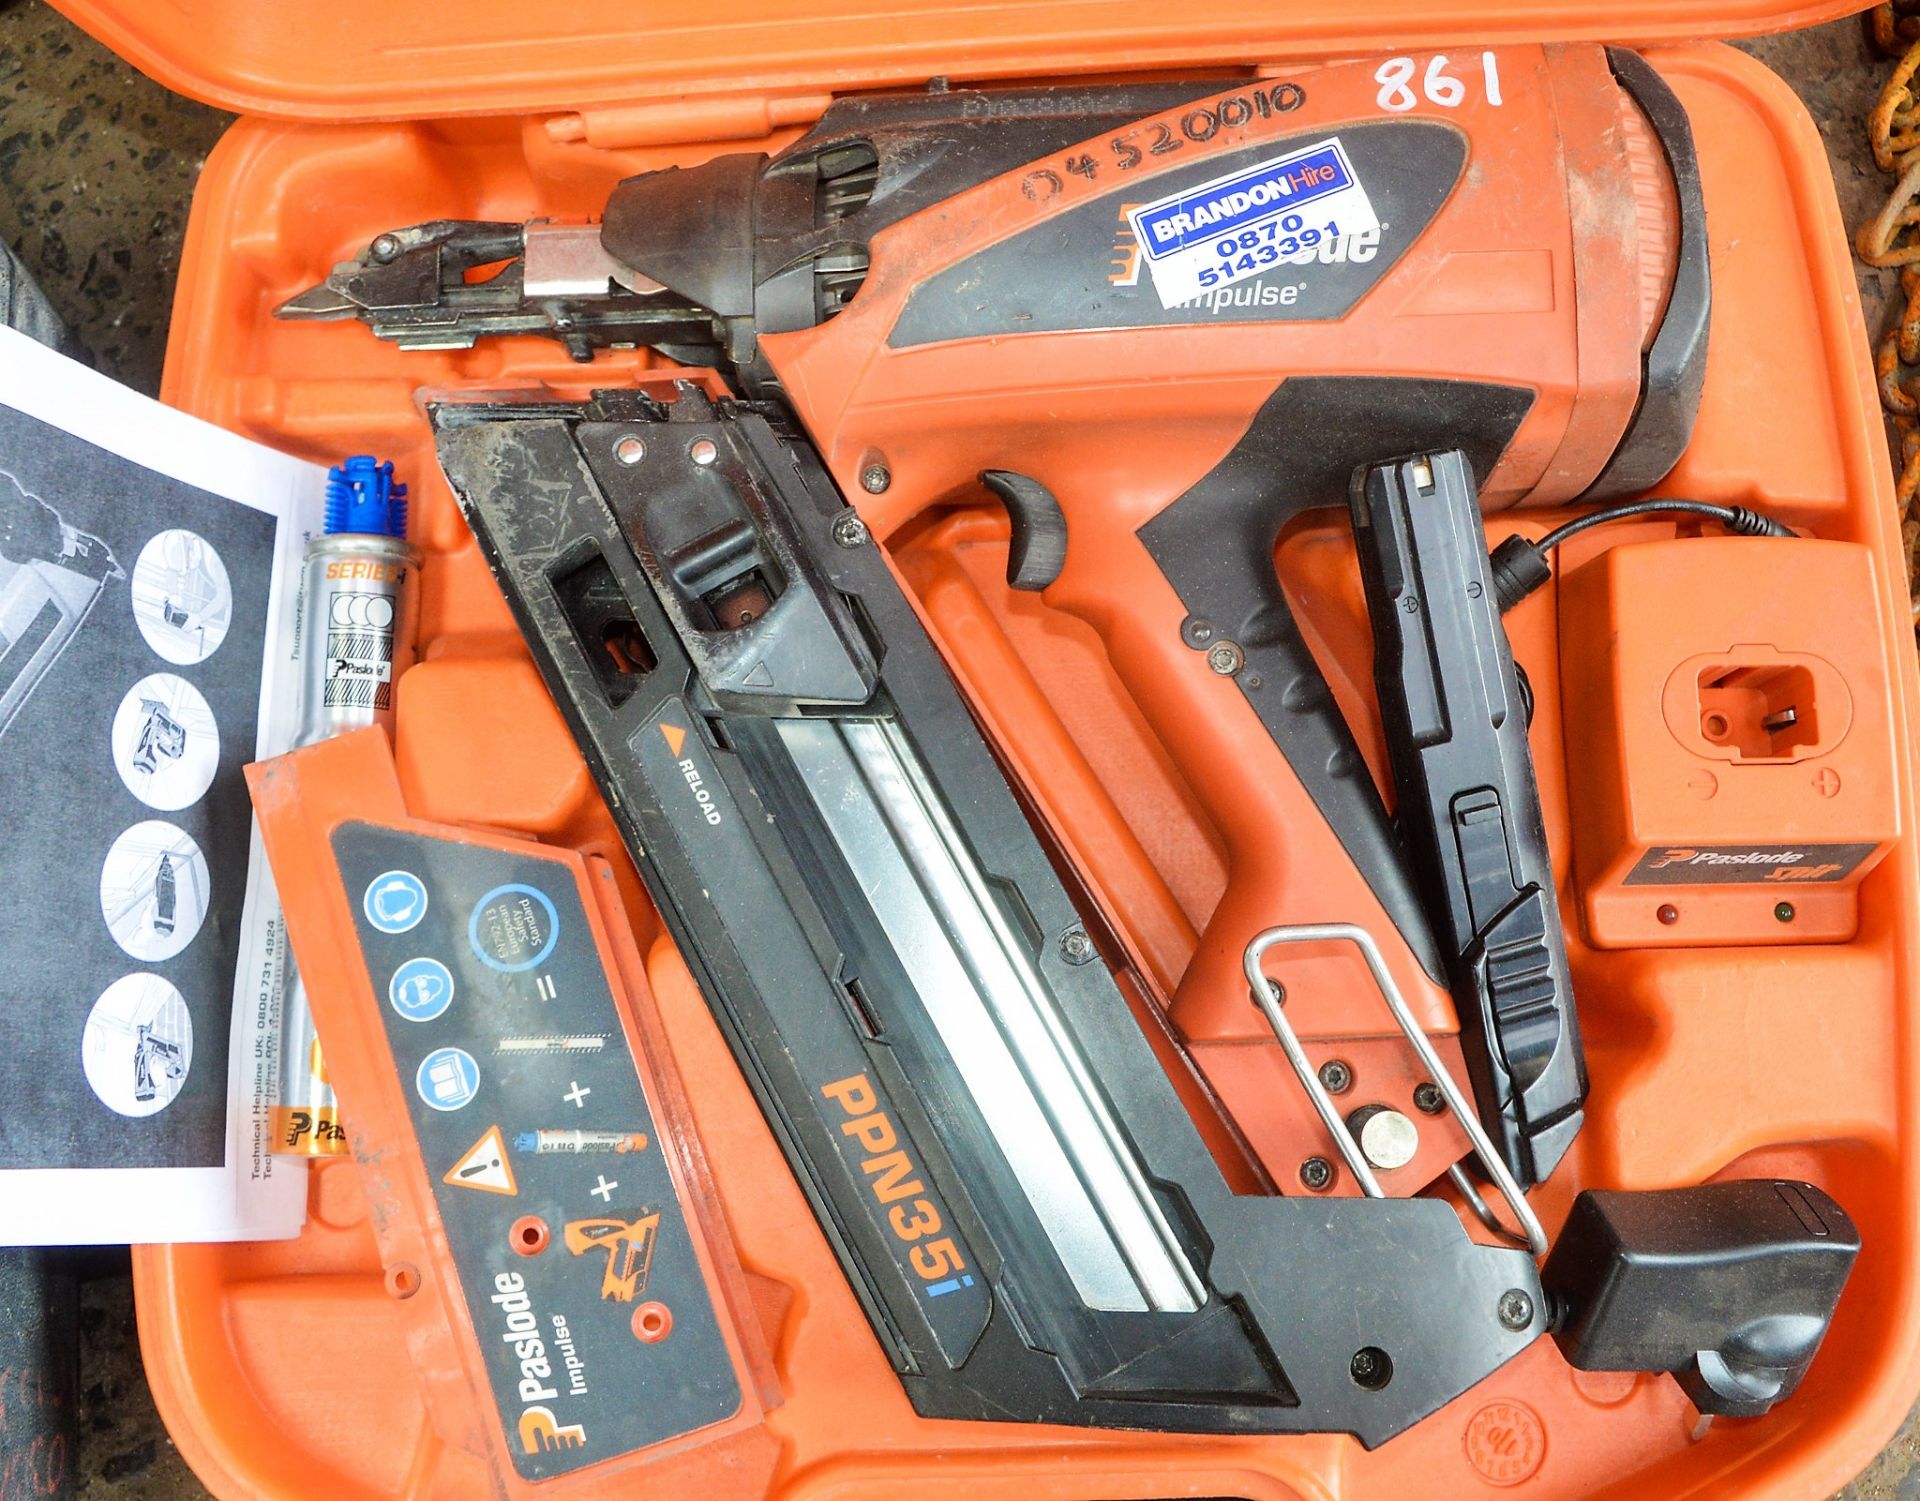 Paslode cordless nail gun c/w charger, 2 batteries & carry case